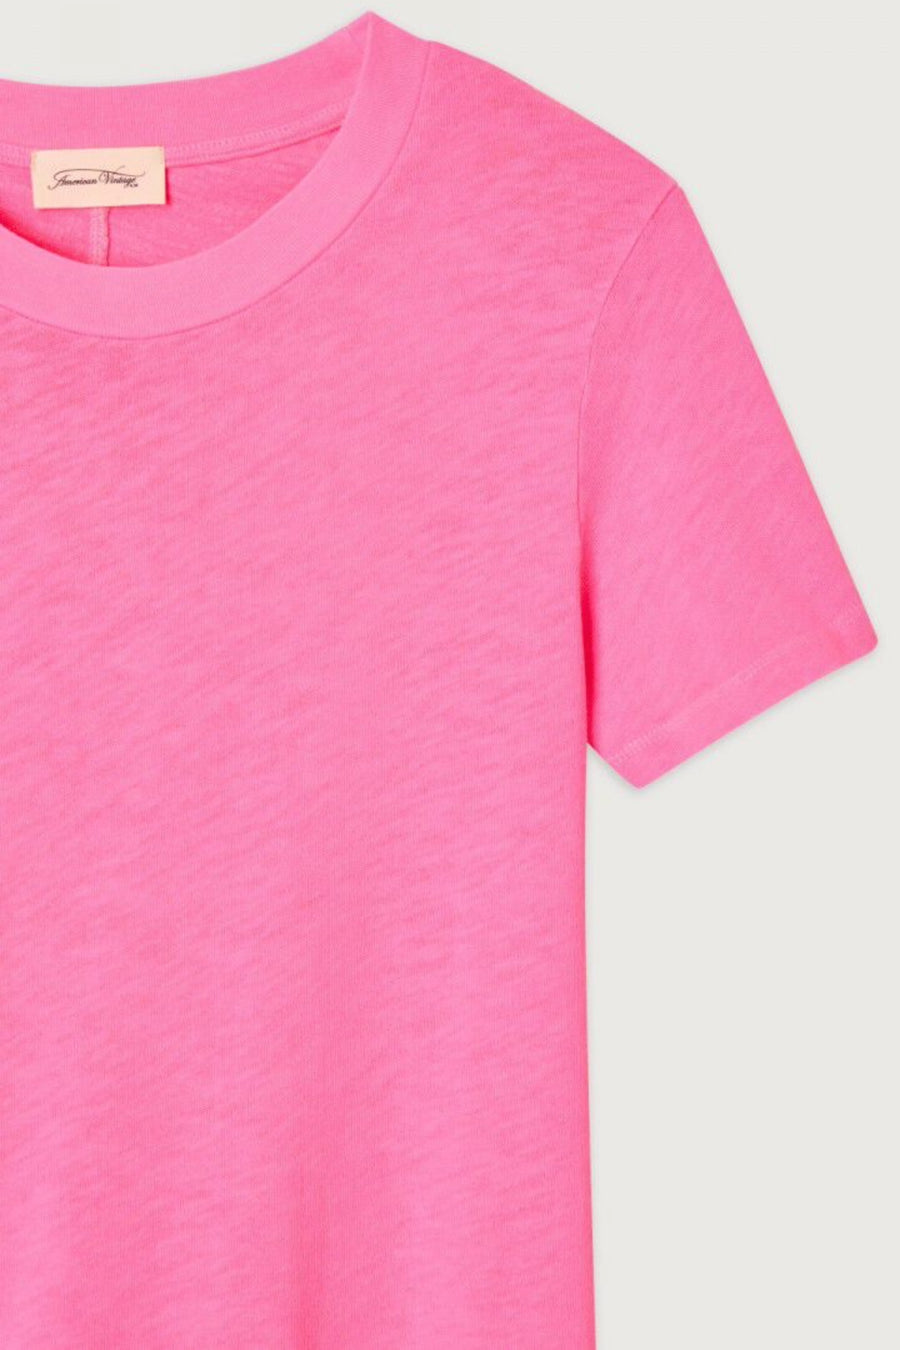 American Vintage T-Shirt Sonoma pink fluo